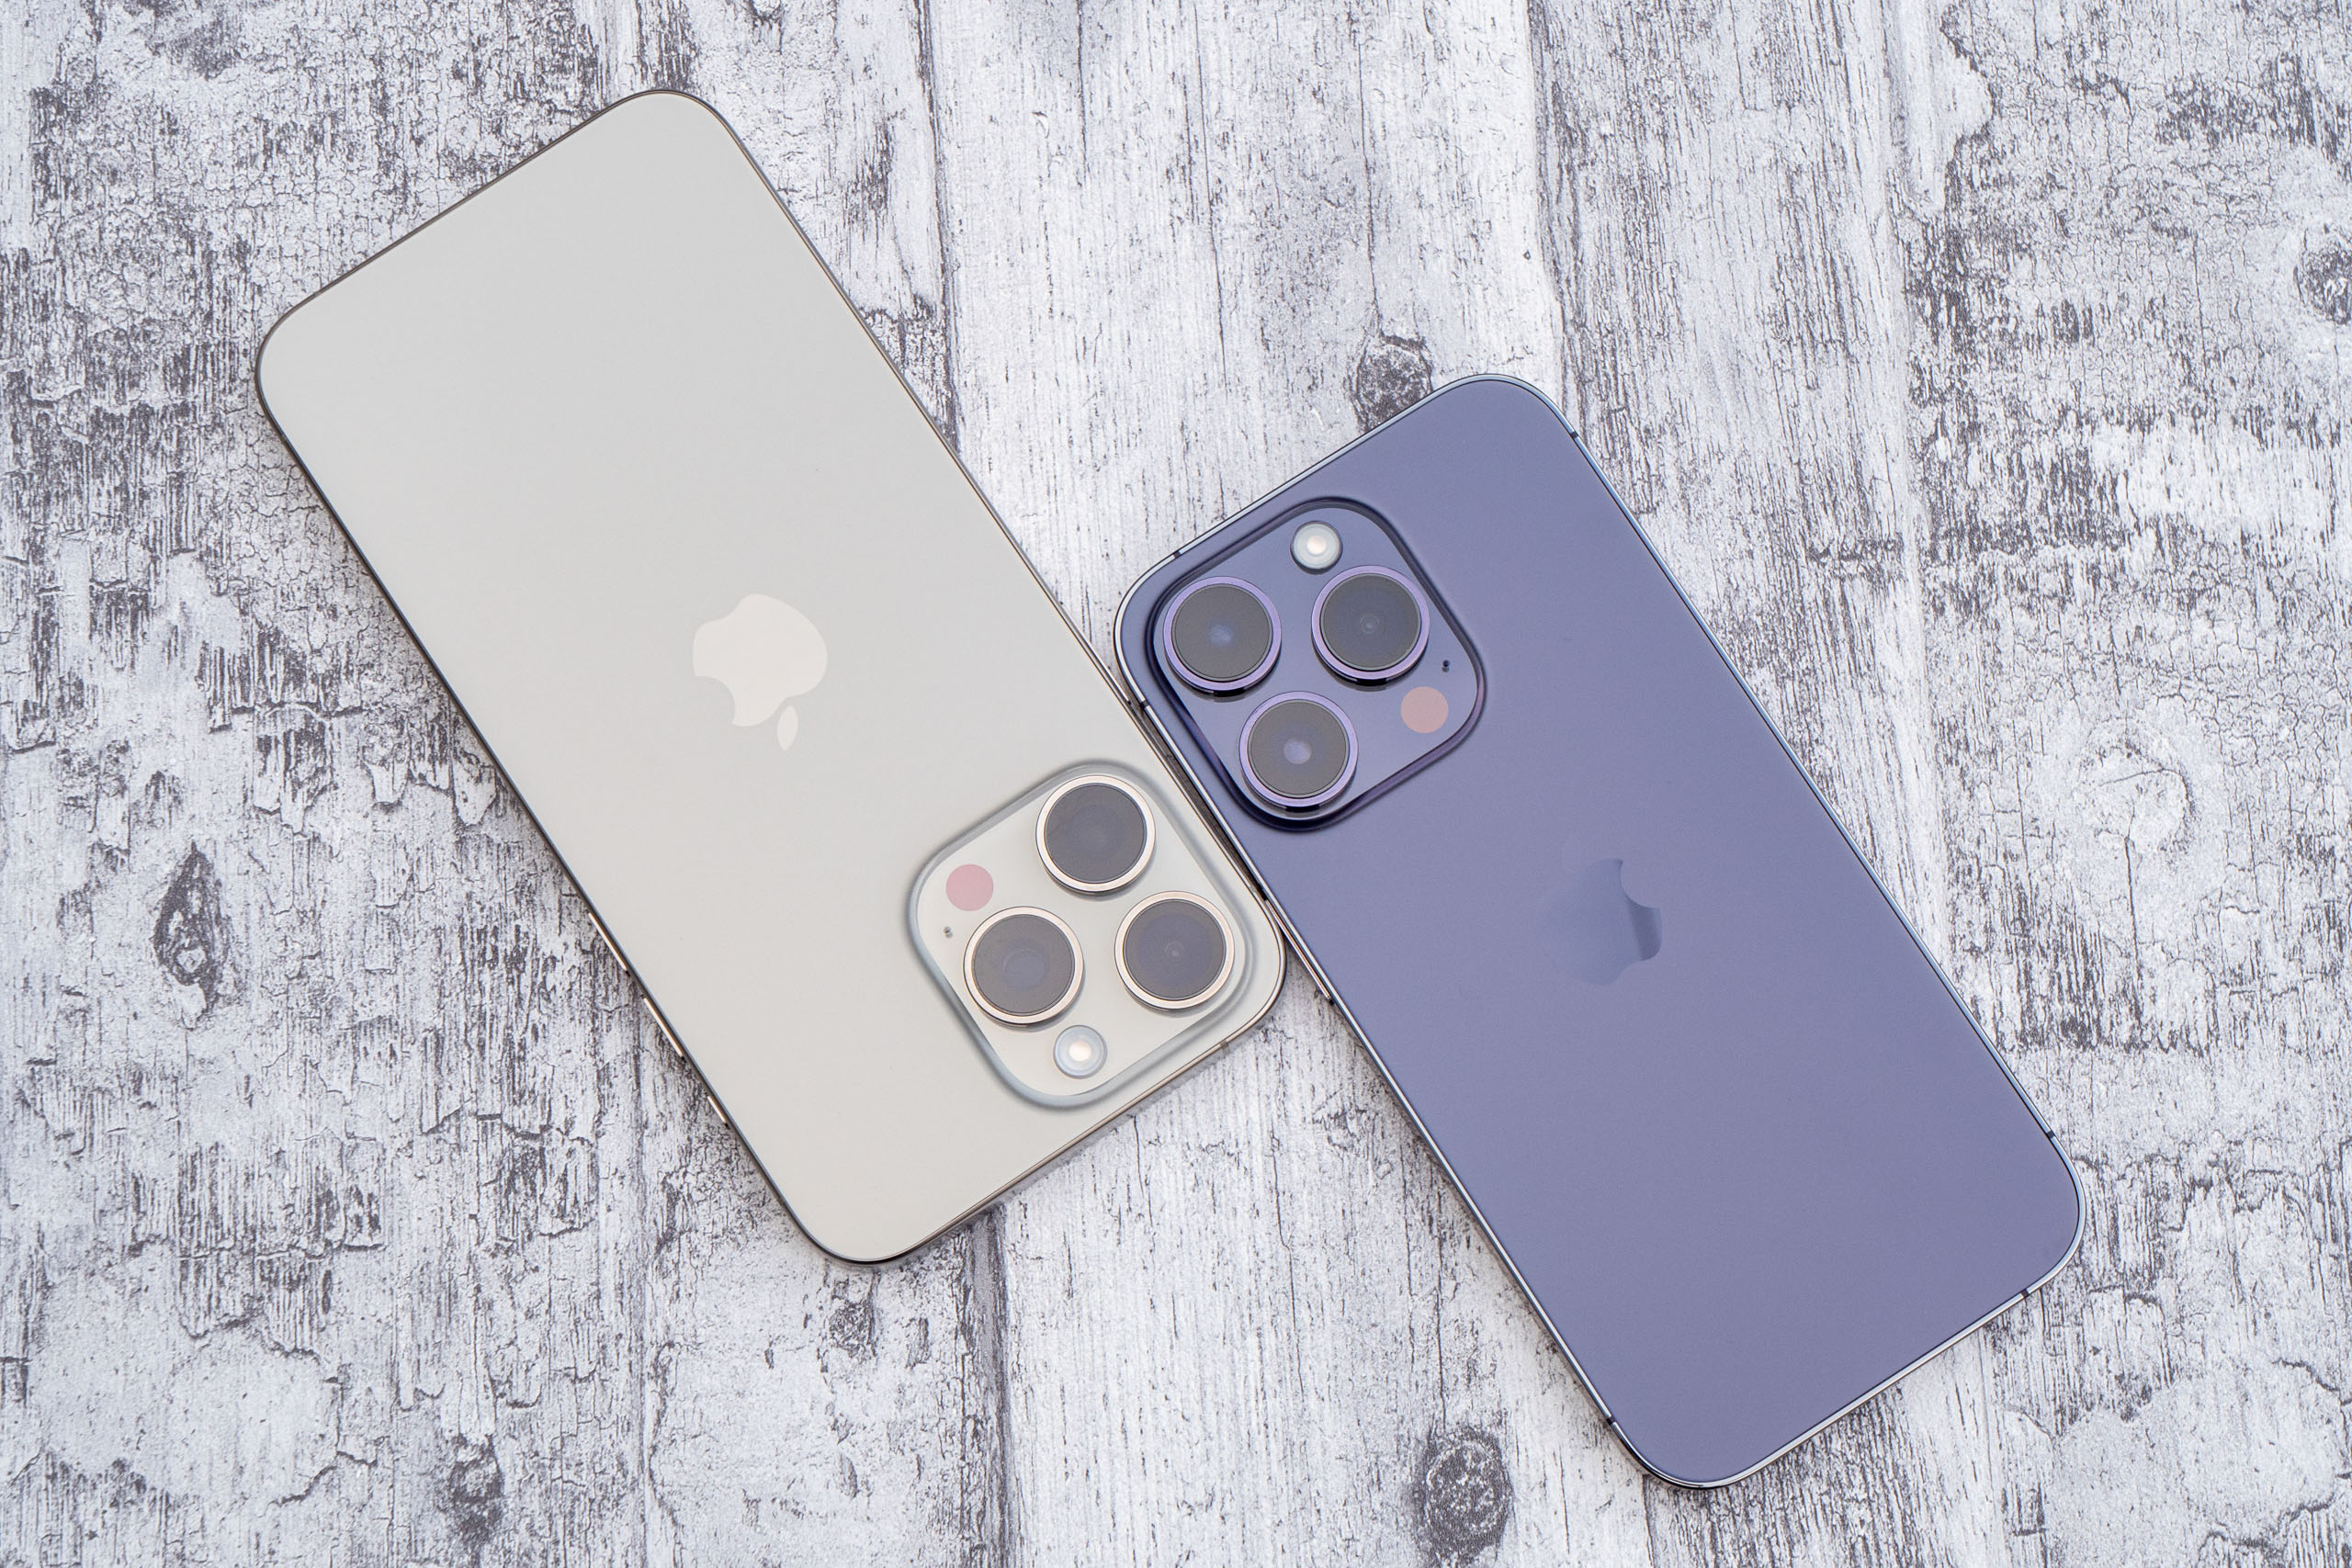 iPhone 14 Pro vs iPhone 14 Pro Max: Which iPhone should you upgrade to?